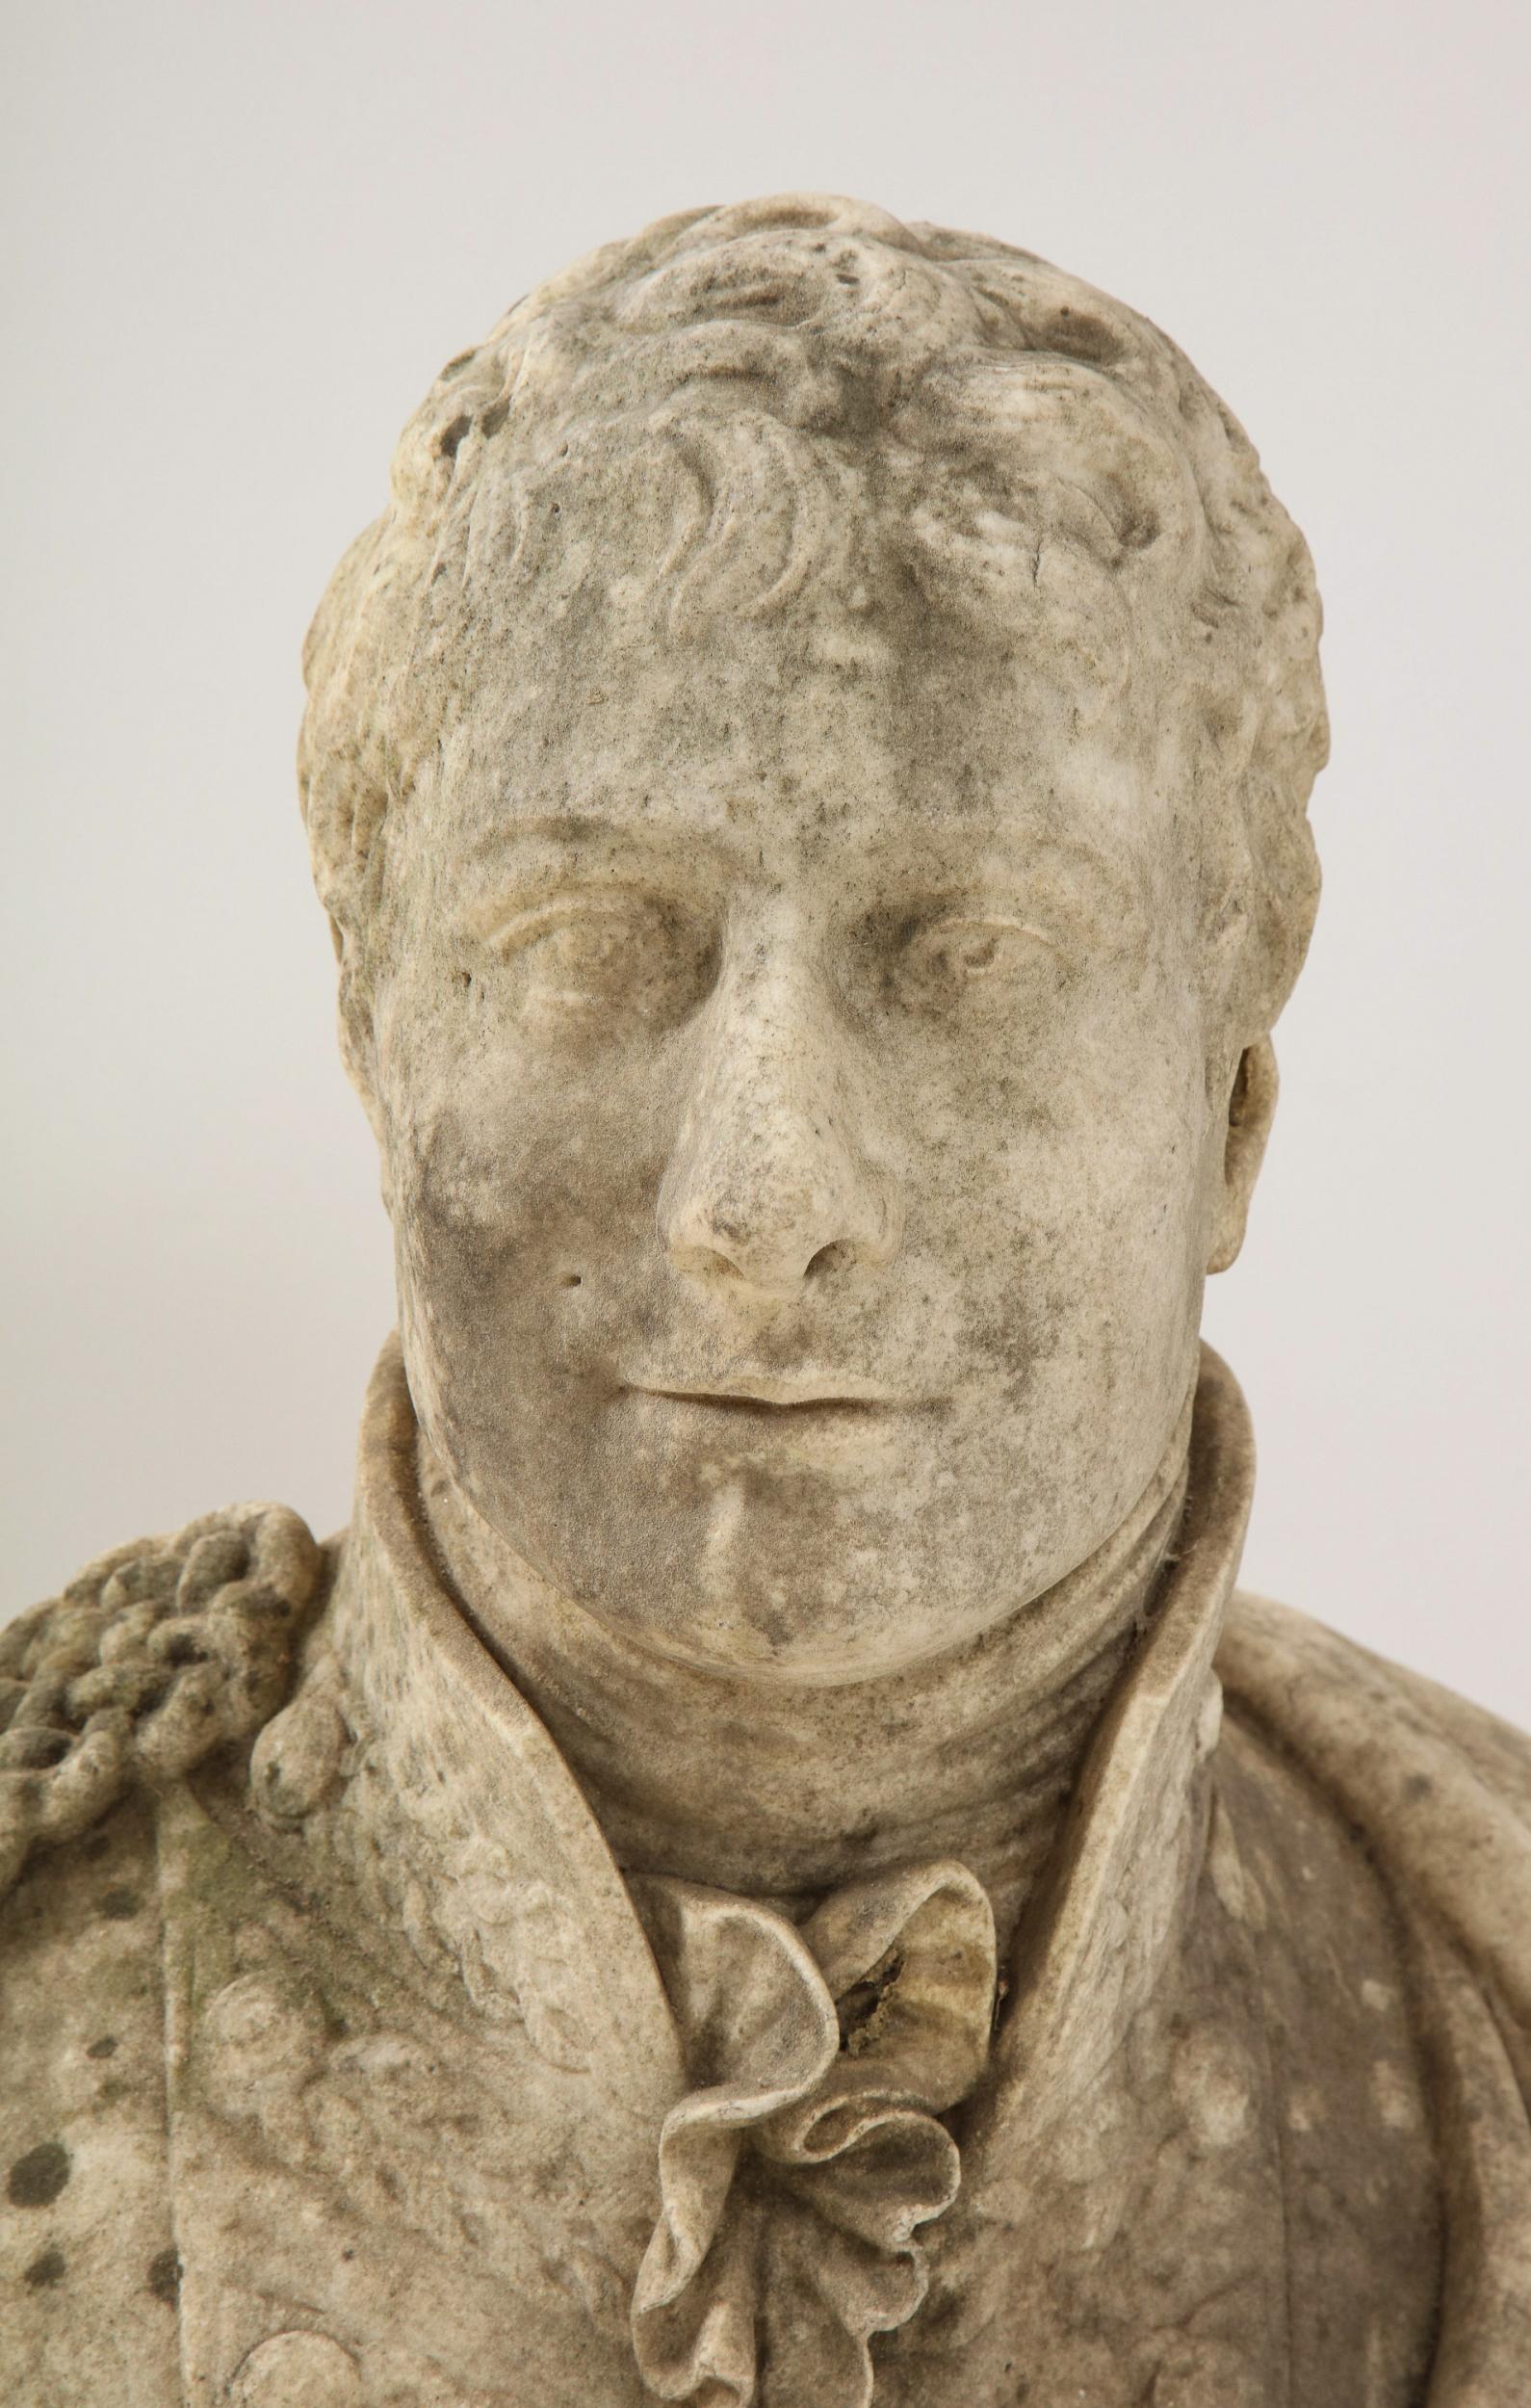 Fine Georgian marble bust of Major General Montagu-Roger Burgoyne, the 8th baronet of Sutton, Signed G. Garrard. Sculp, 1818.

Sir Montagu-Roger Burgoyne, eighth baronet (d. 1817), army officer, was, like his father, a cavalry officer who rose to